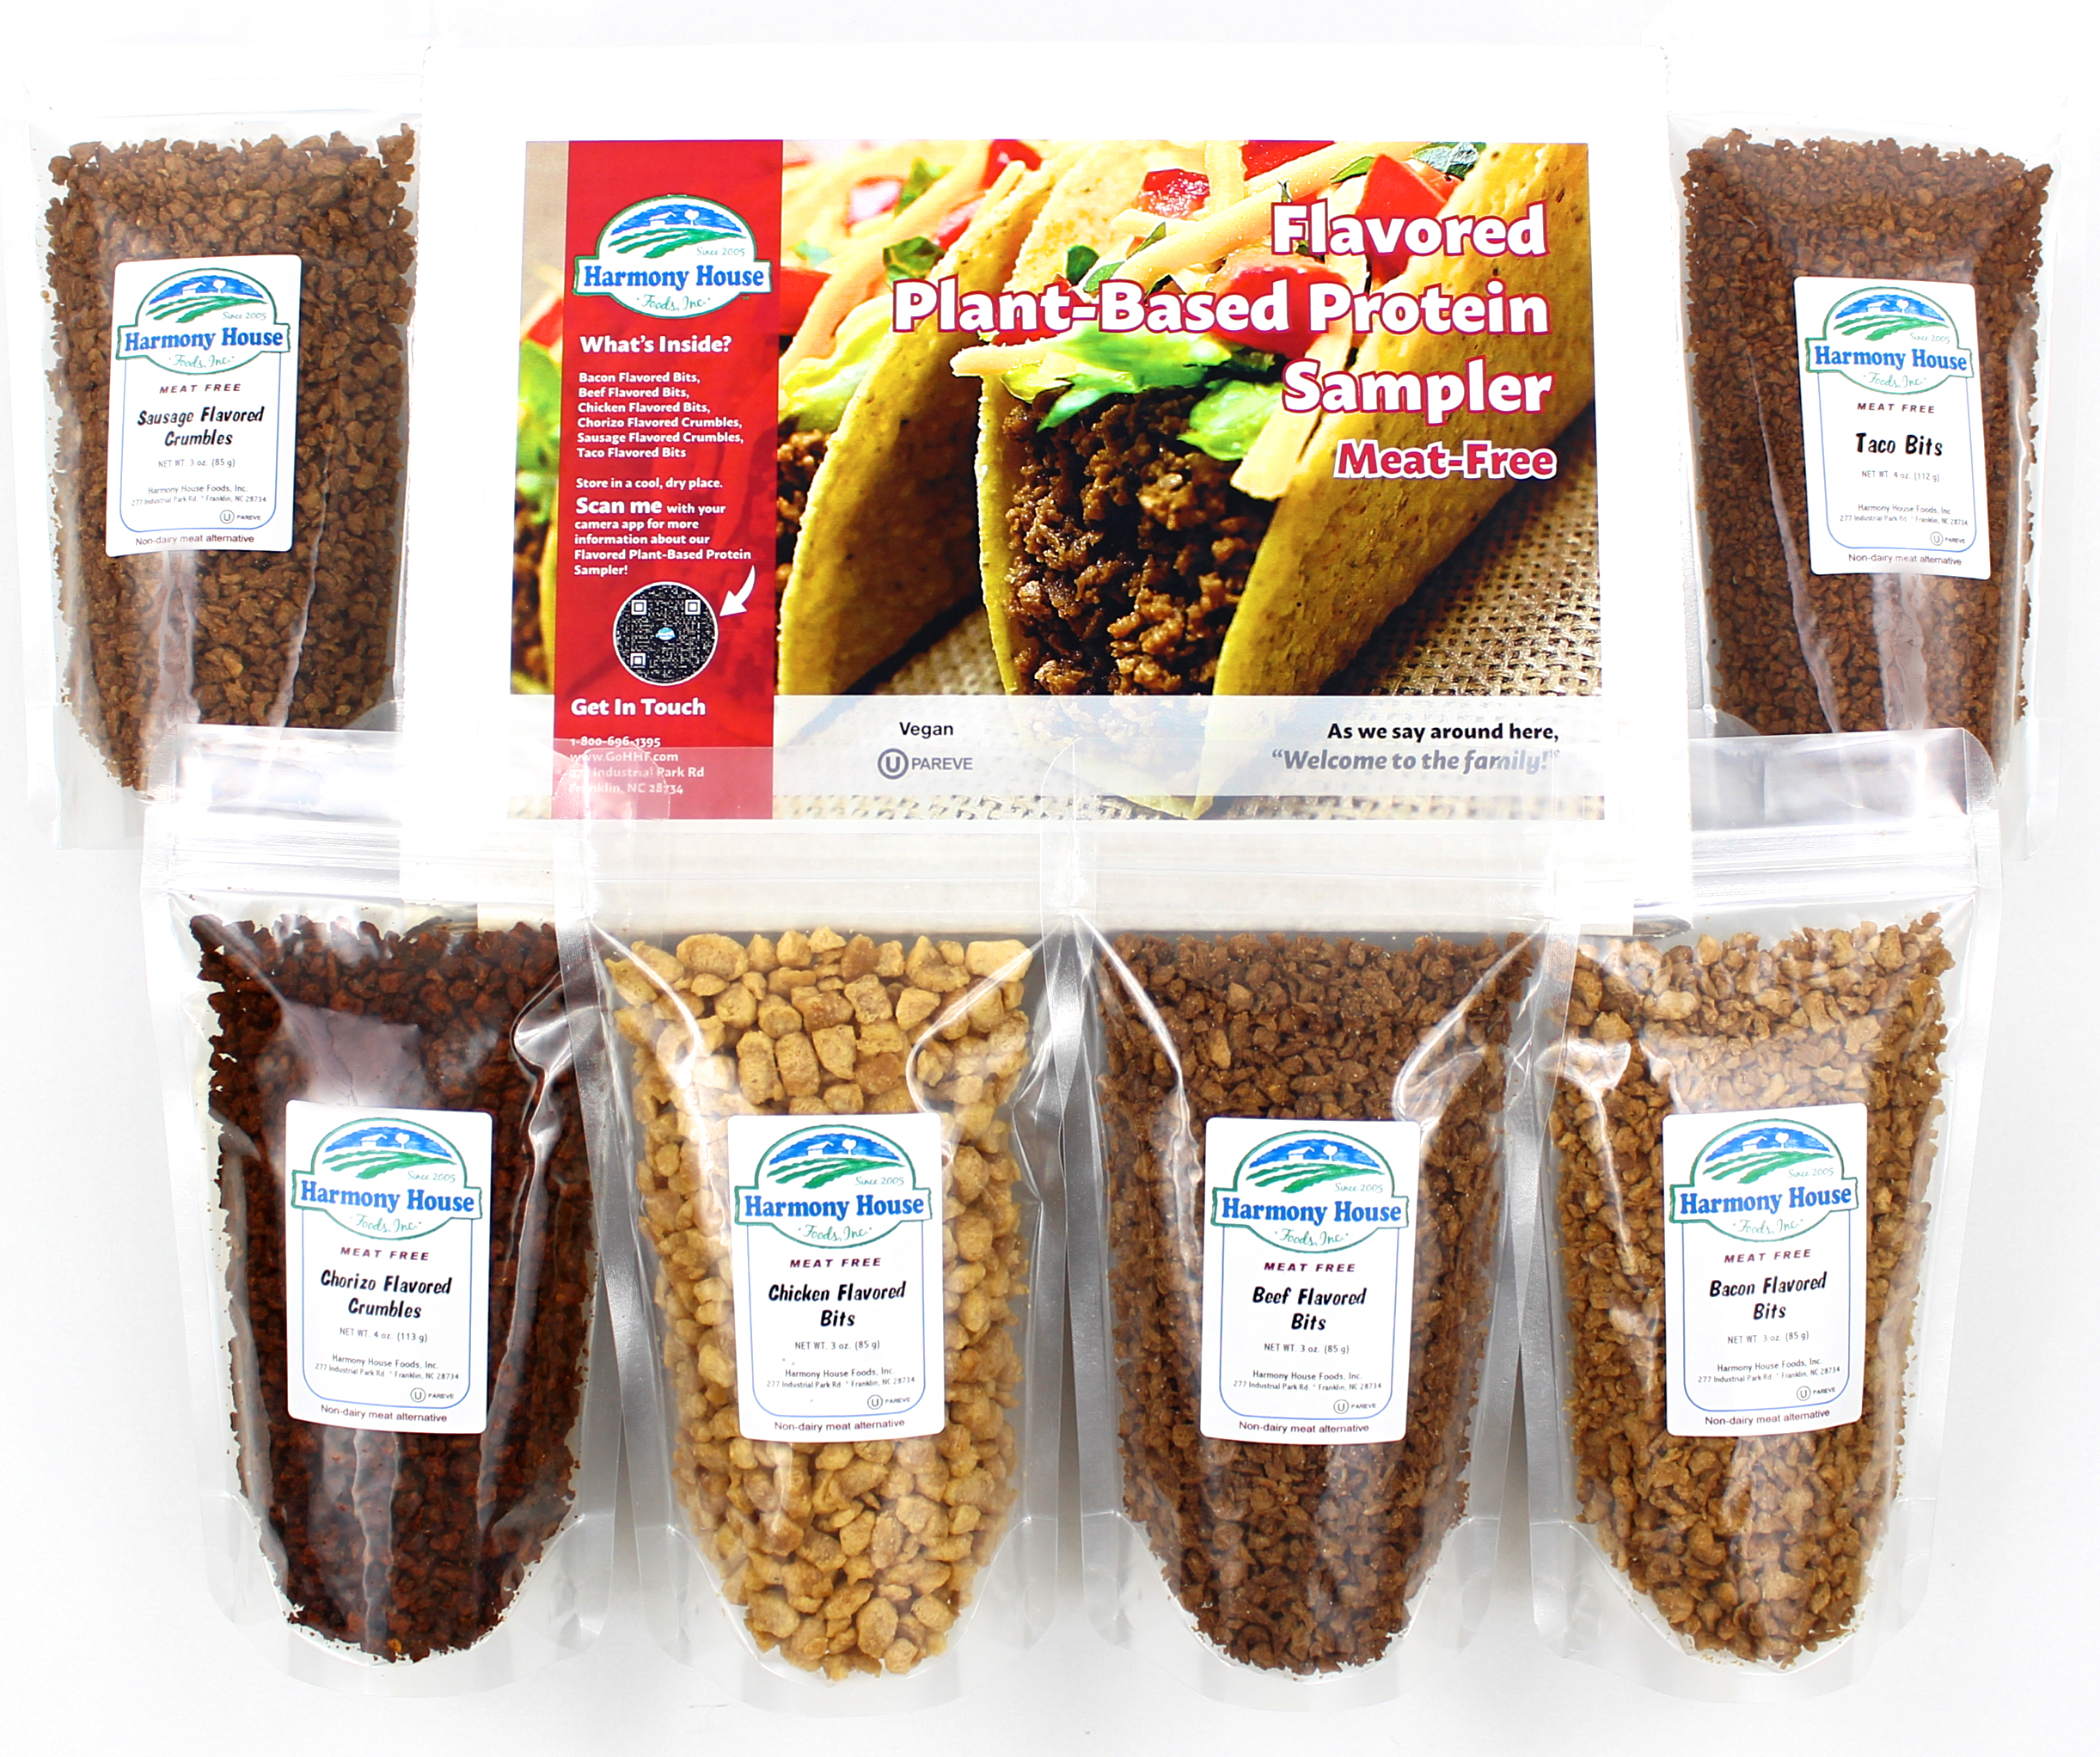 A bag of plant-based protein samplers.